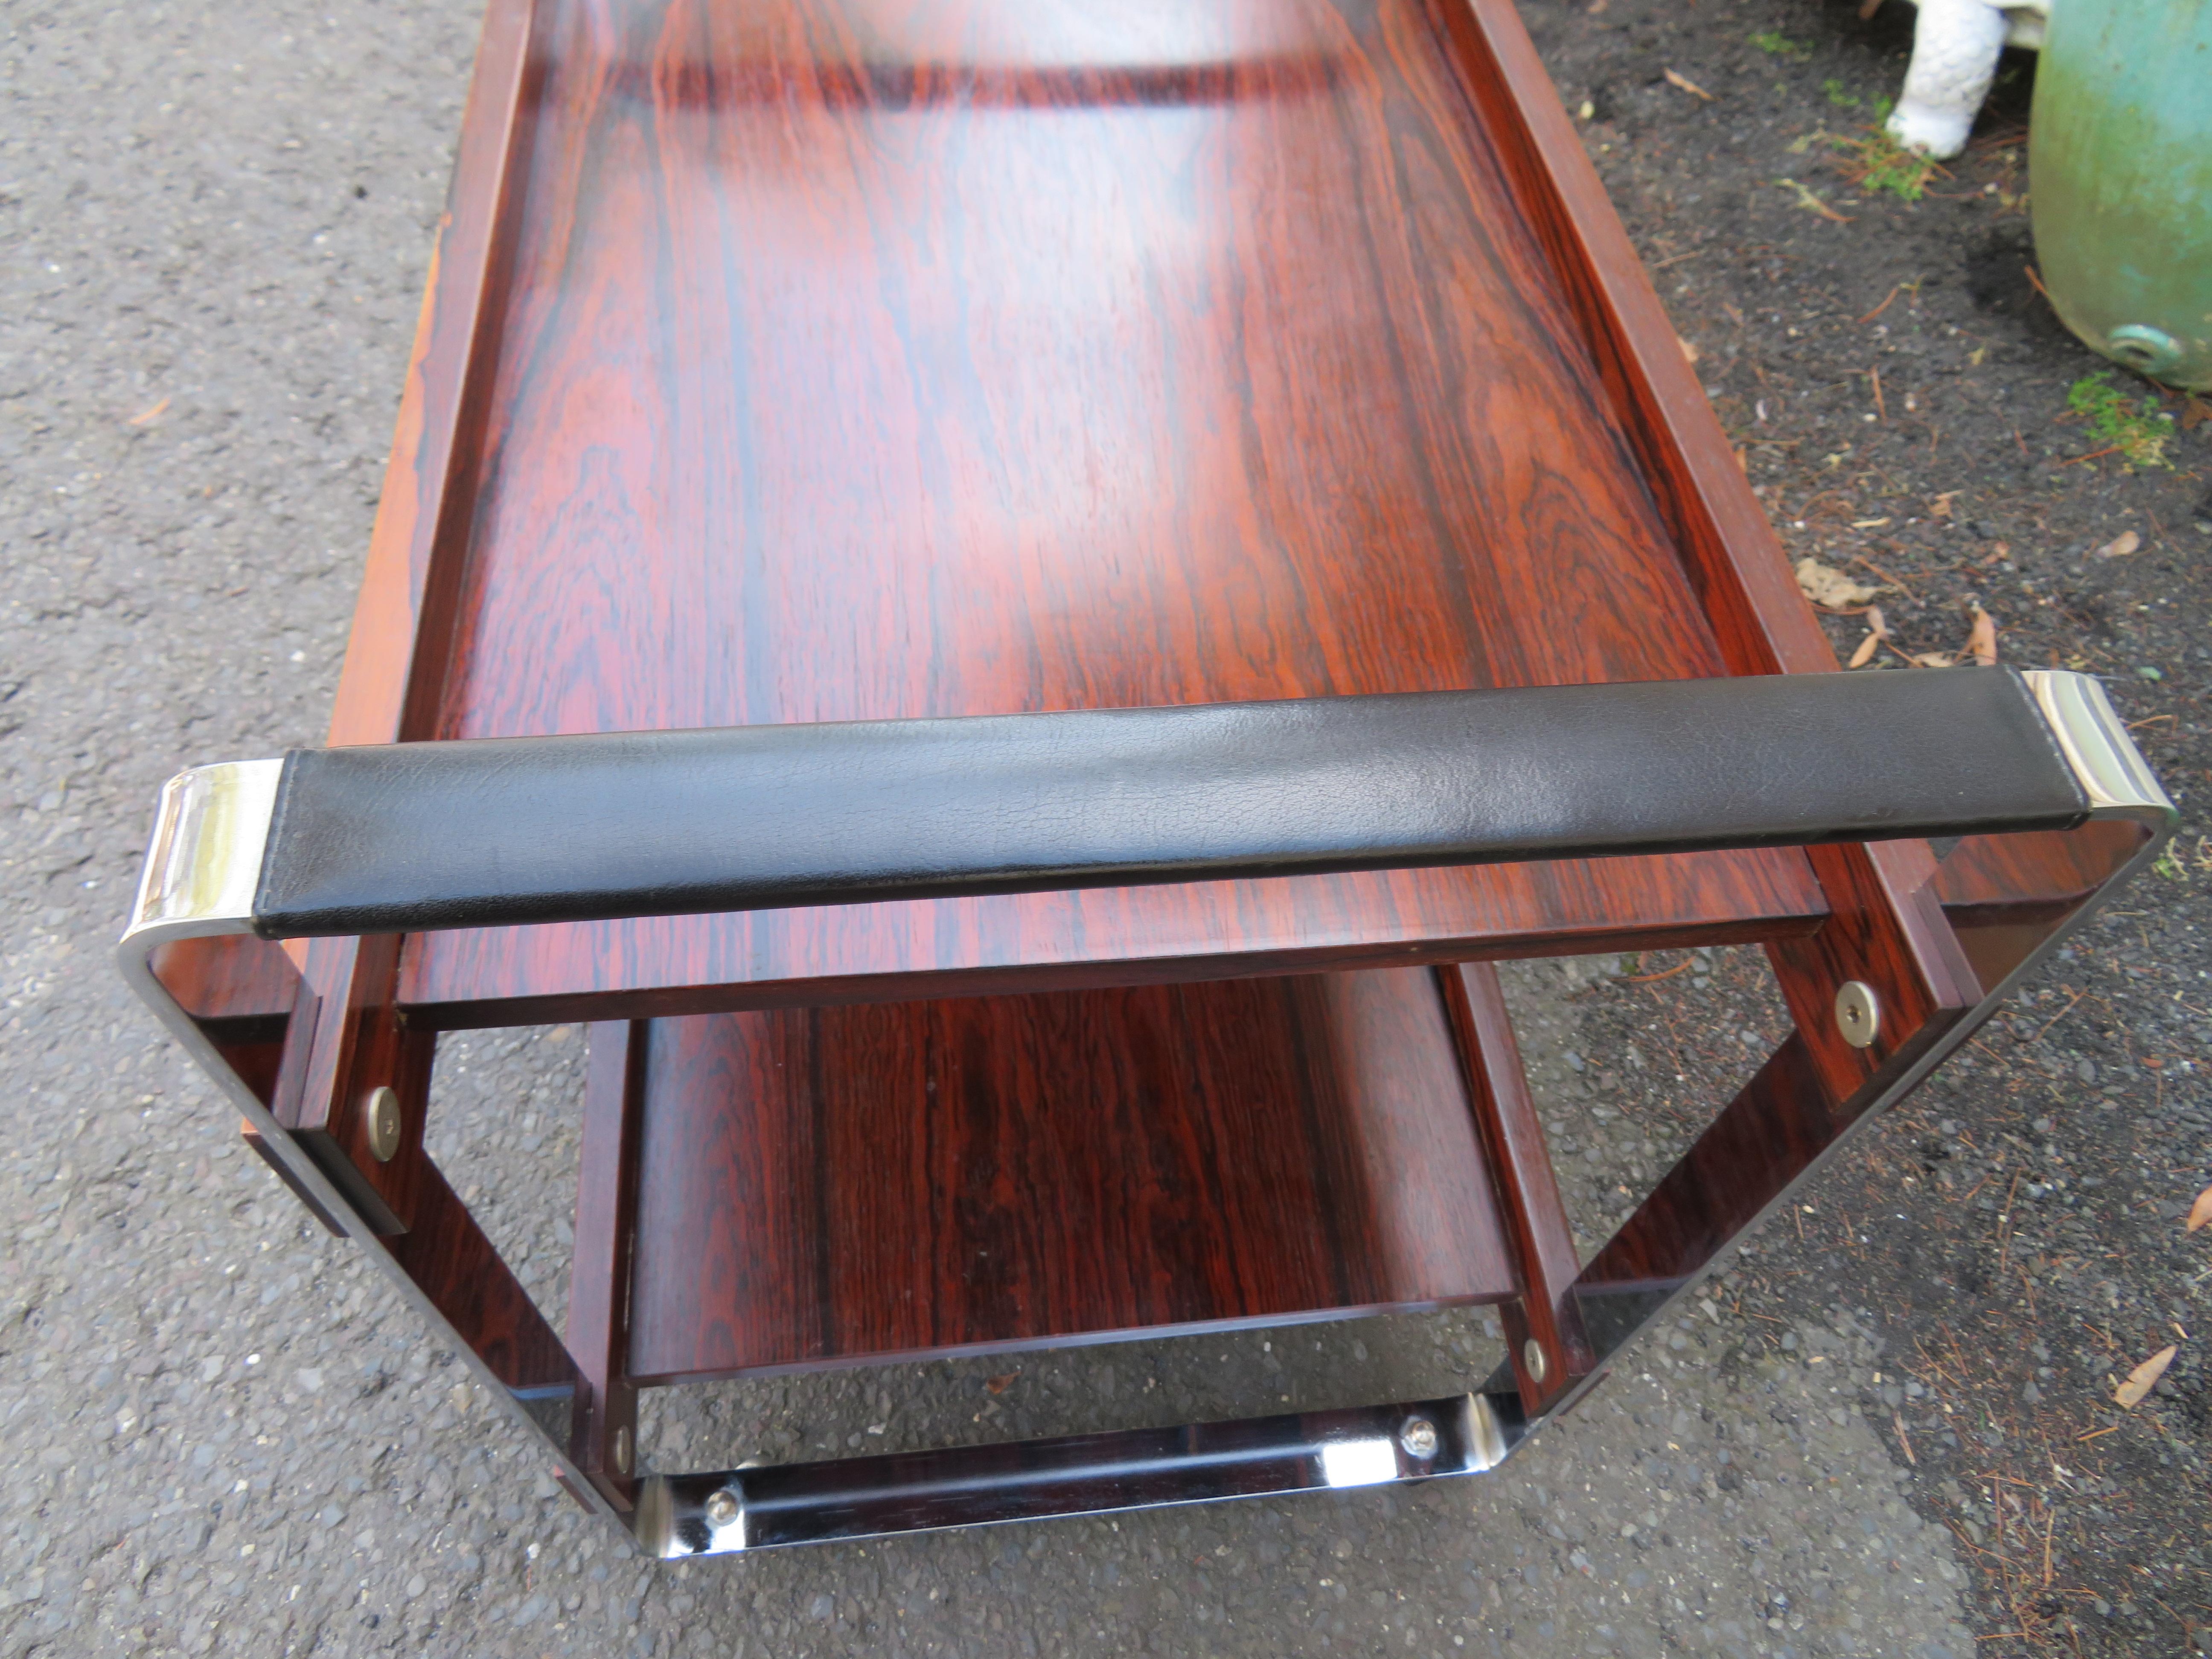 Stunning Rosewood and Chrome Rolling Bar Cart Richard Young Mid-Century Modern For Sale 5